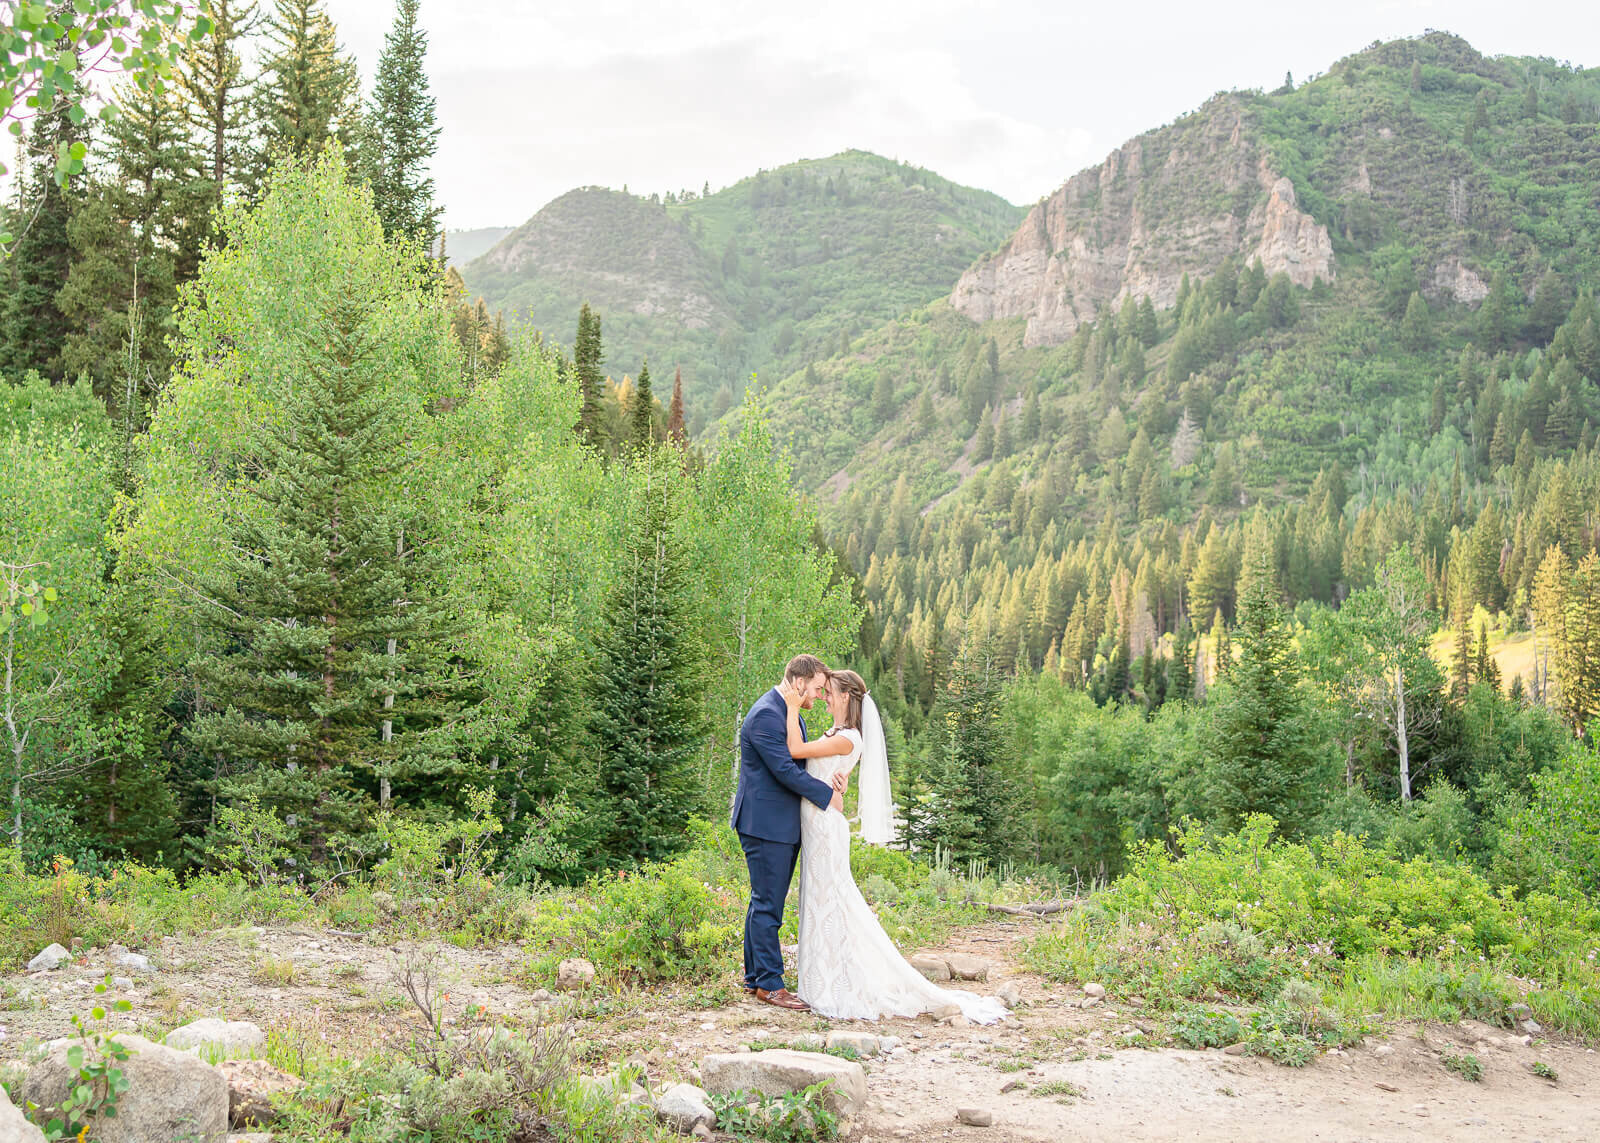 A bride and groom holding each other at Jordan Pines, Big Cottonwood Canyon.